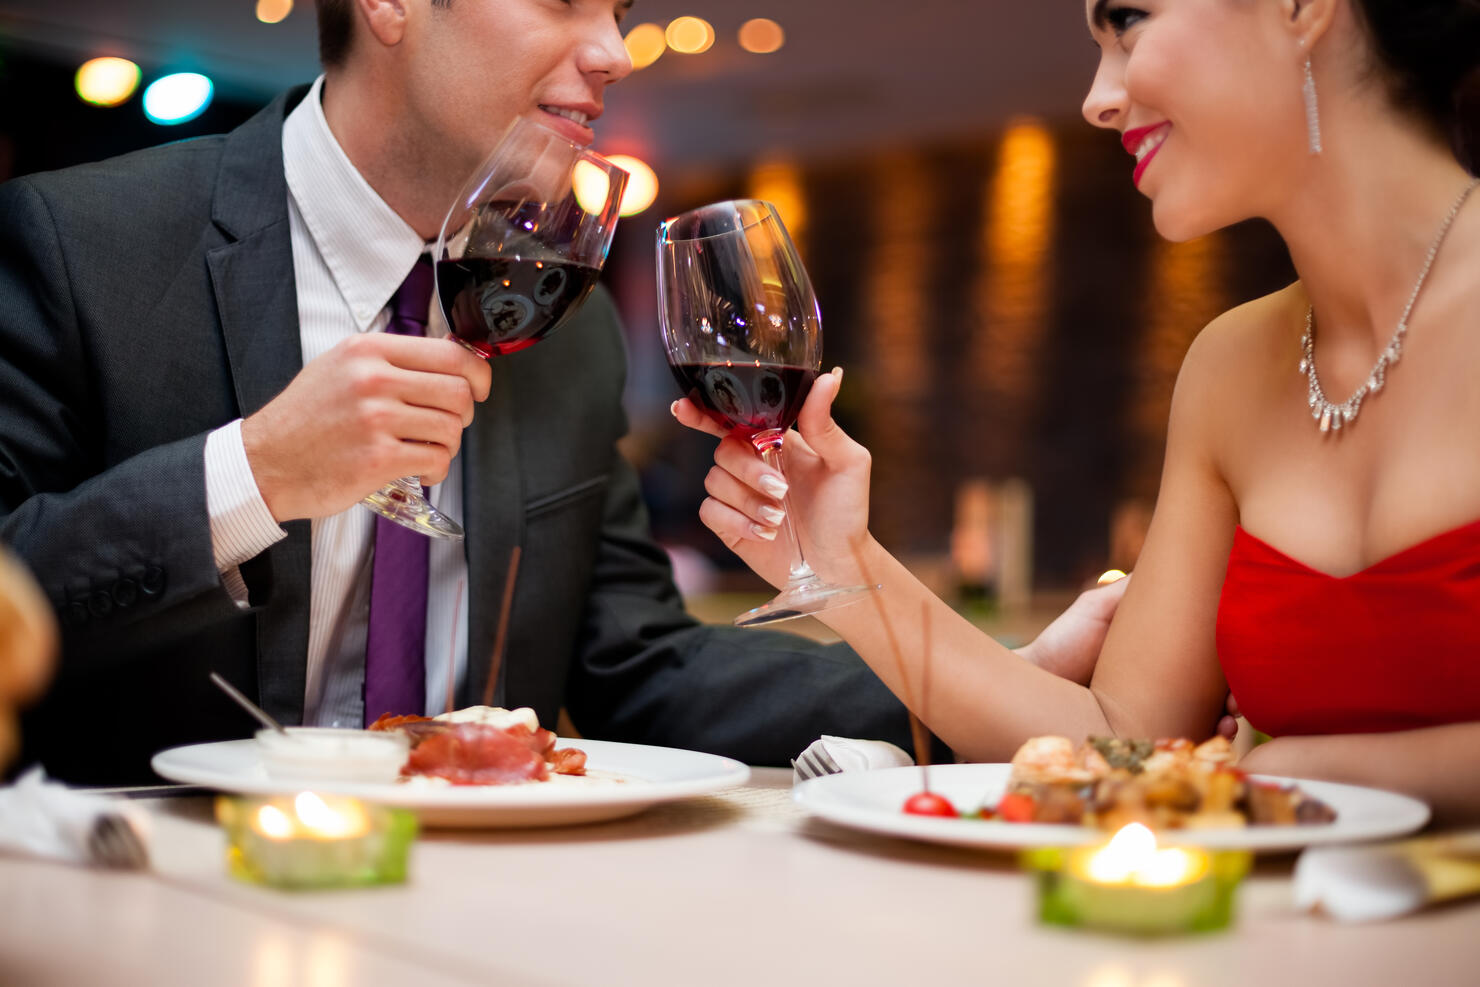 A young couple toasting wine glasses at a fancy restaurant